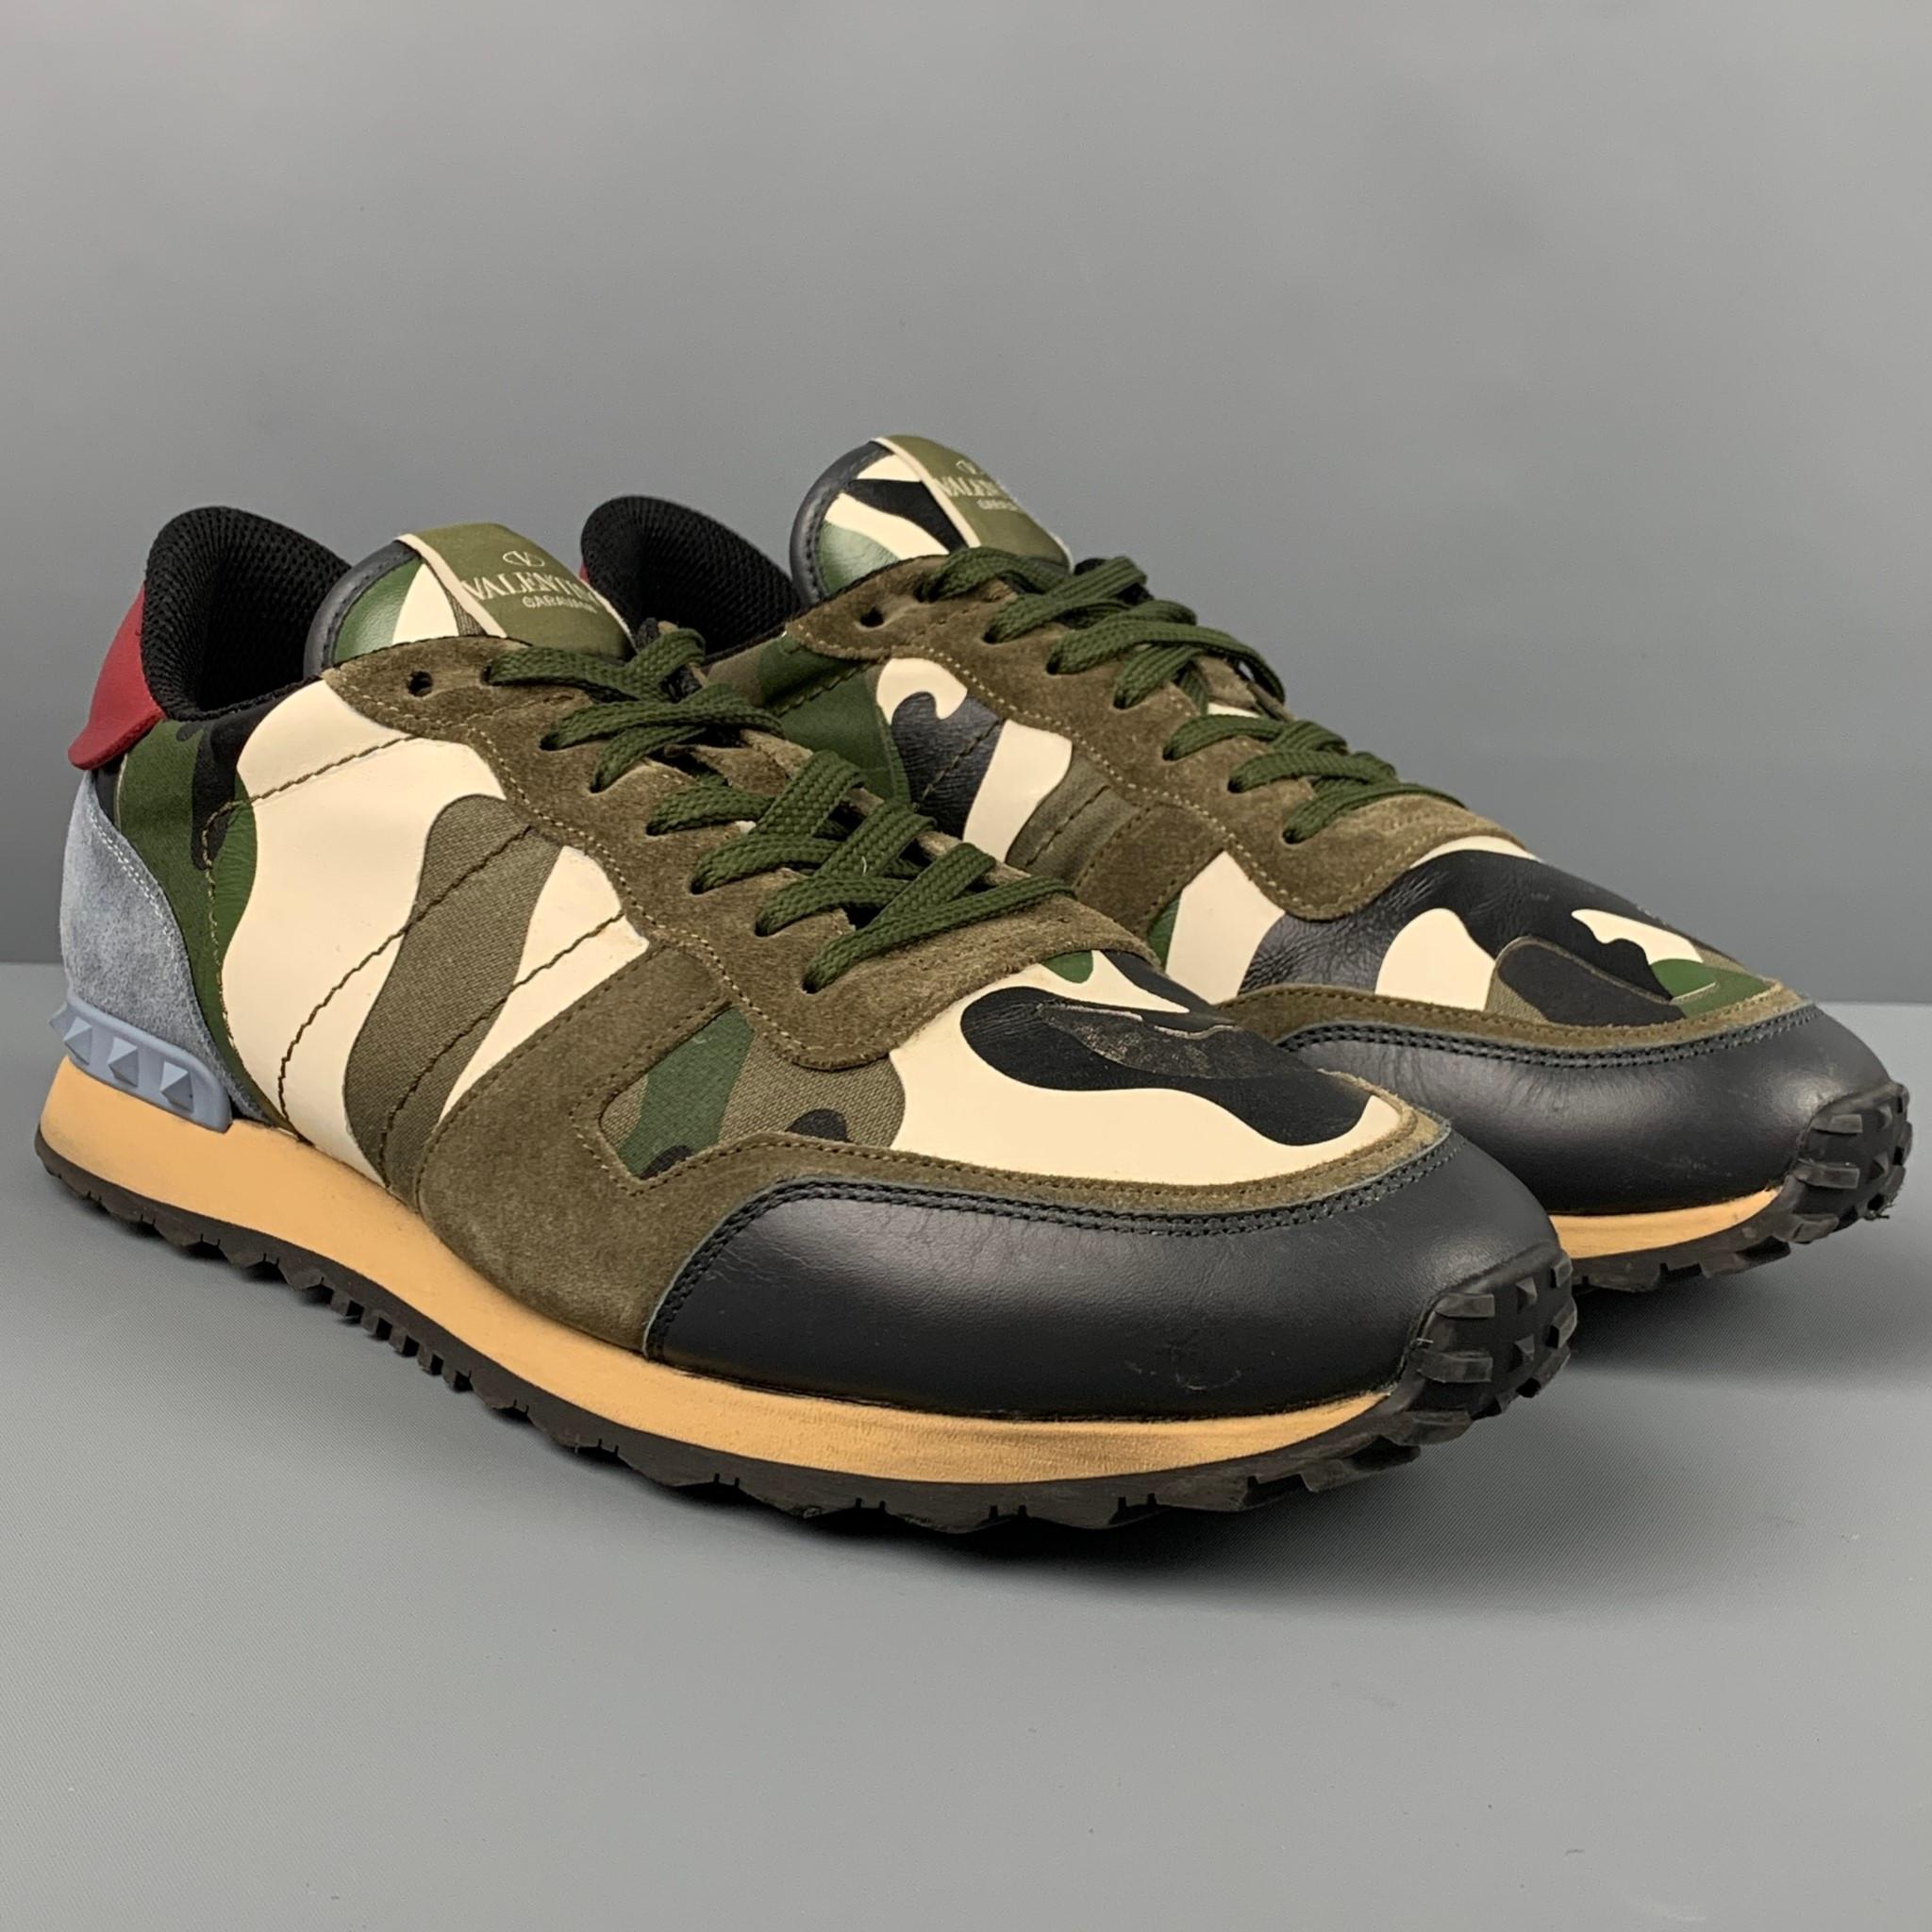 VALENTINO 'Rockrunner' sneakers comes in a olive multi-color camouflage mesh fabric with a leather trim featuring rubber stud details, rubber sole, and a lace up closure. Includes box. Made in Italy. 

Very Good Pre-Owned Condition.
Marked: TJ 723